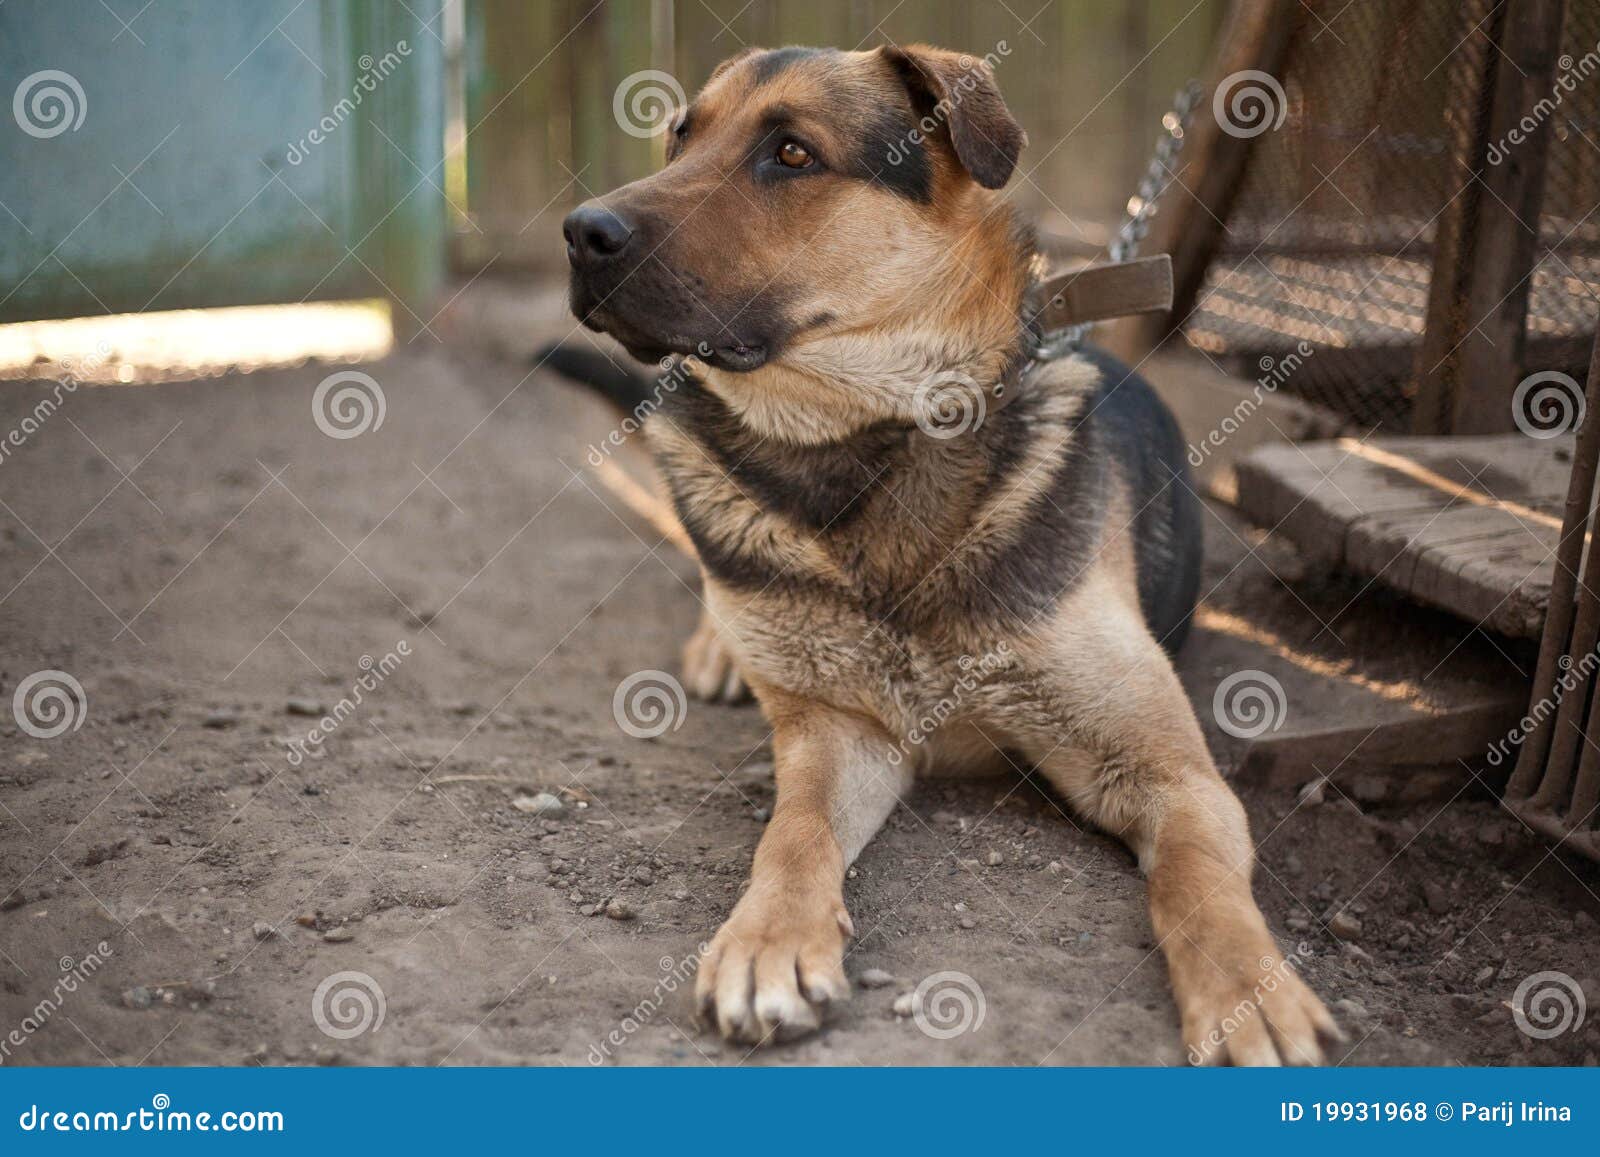 A Dog On A Chain Royalty Free Stock Photos - Image: 19931968